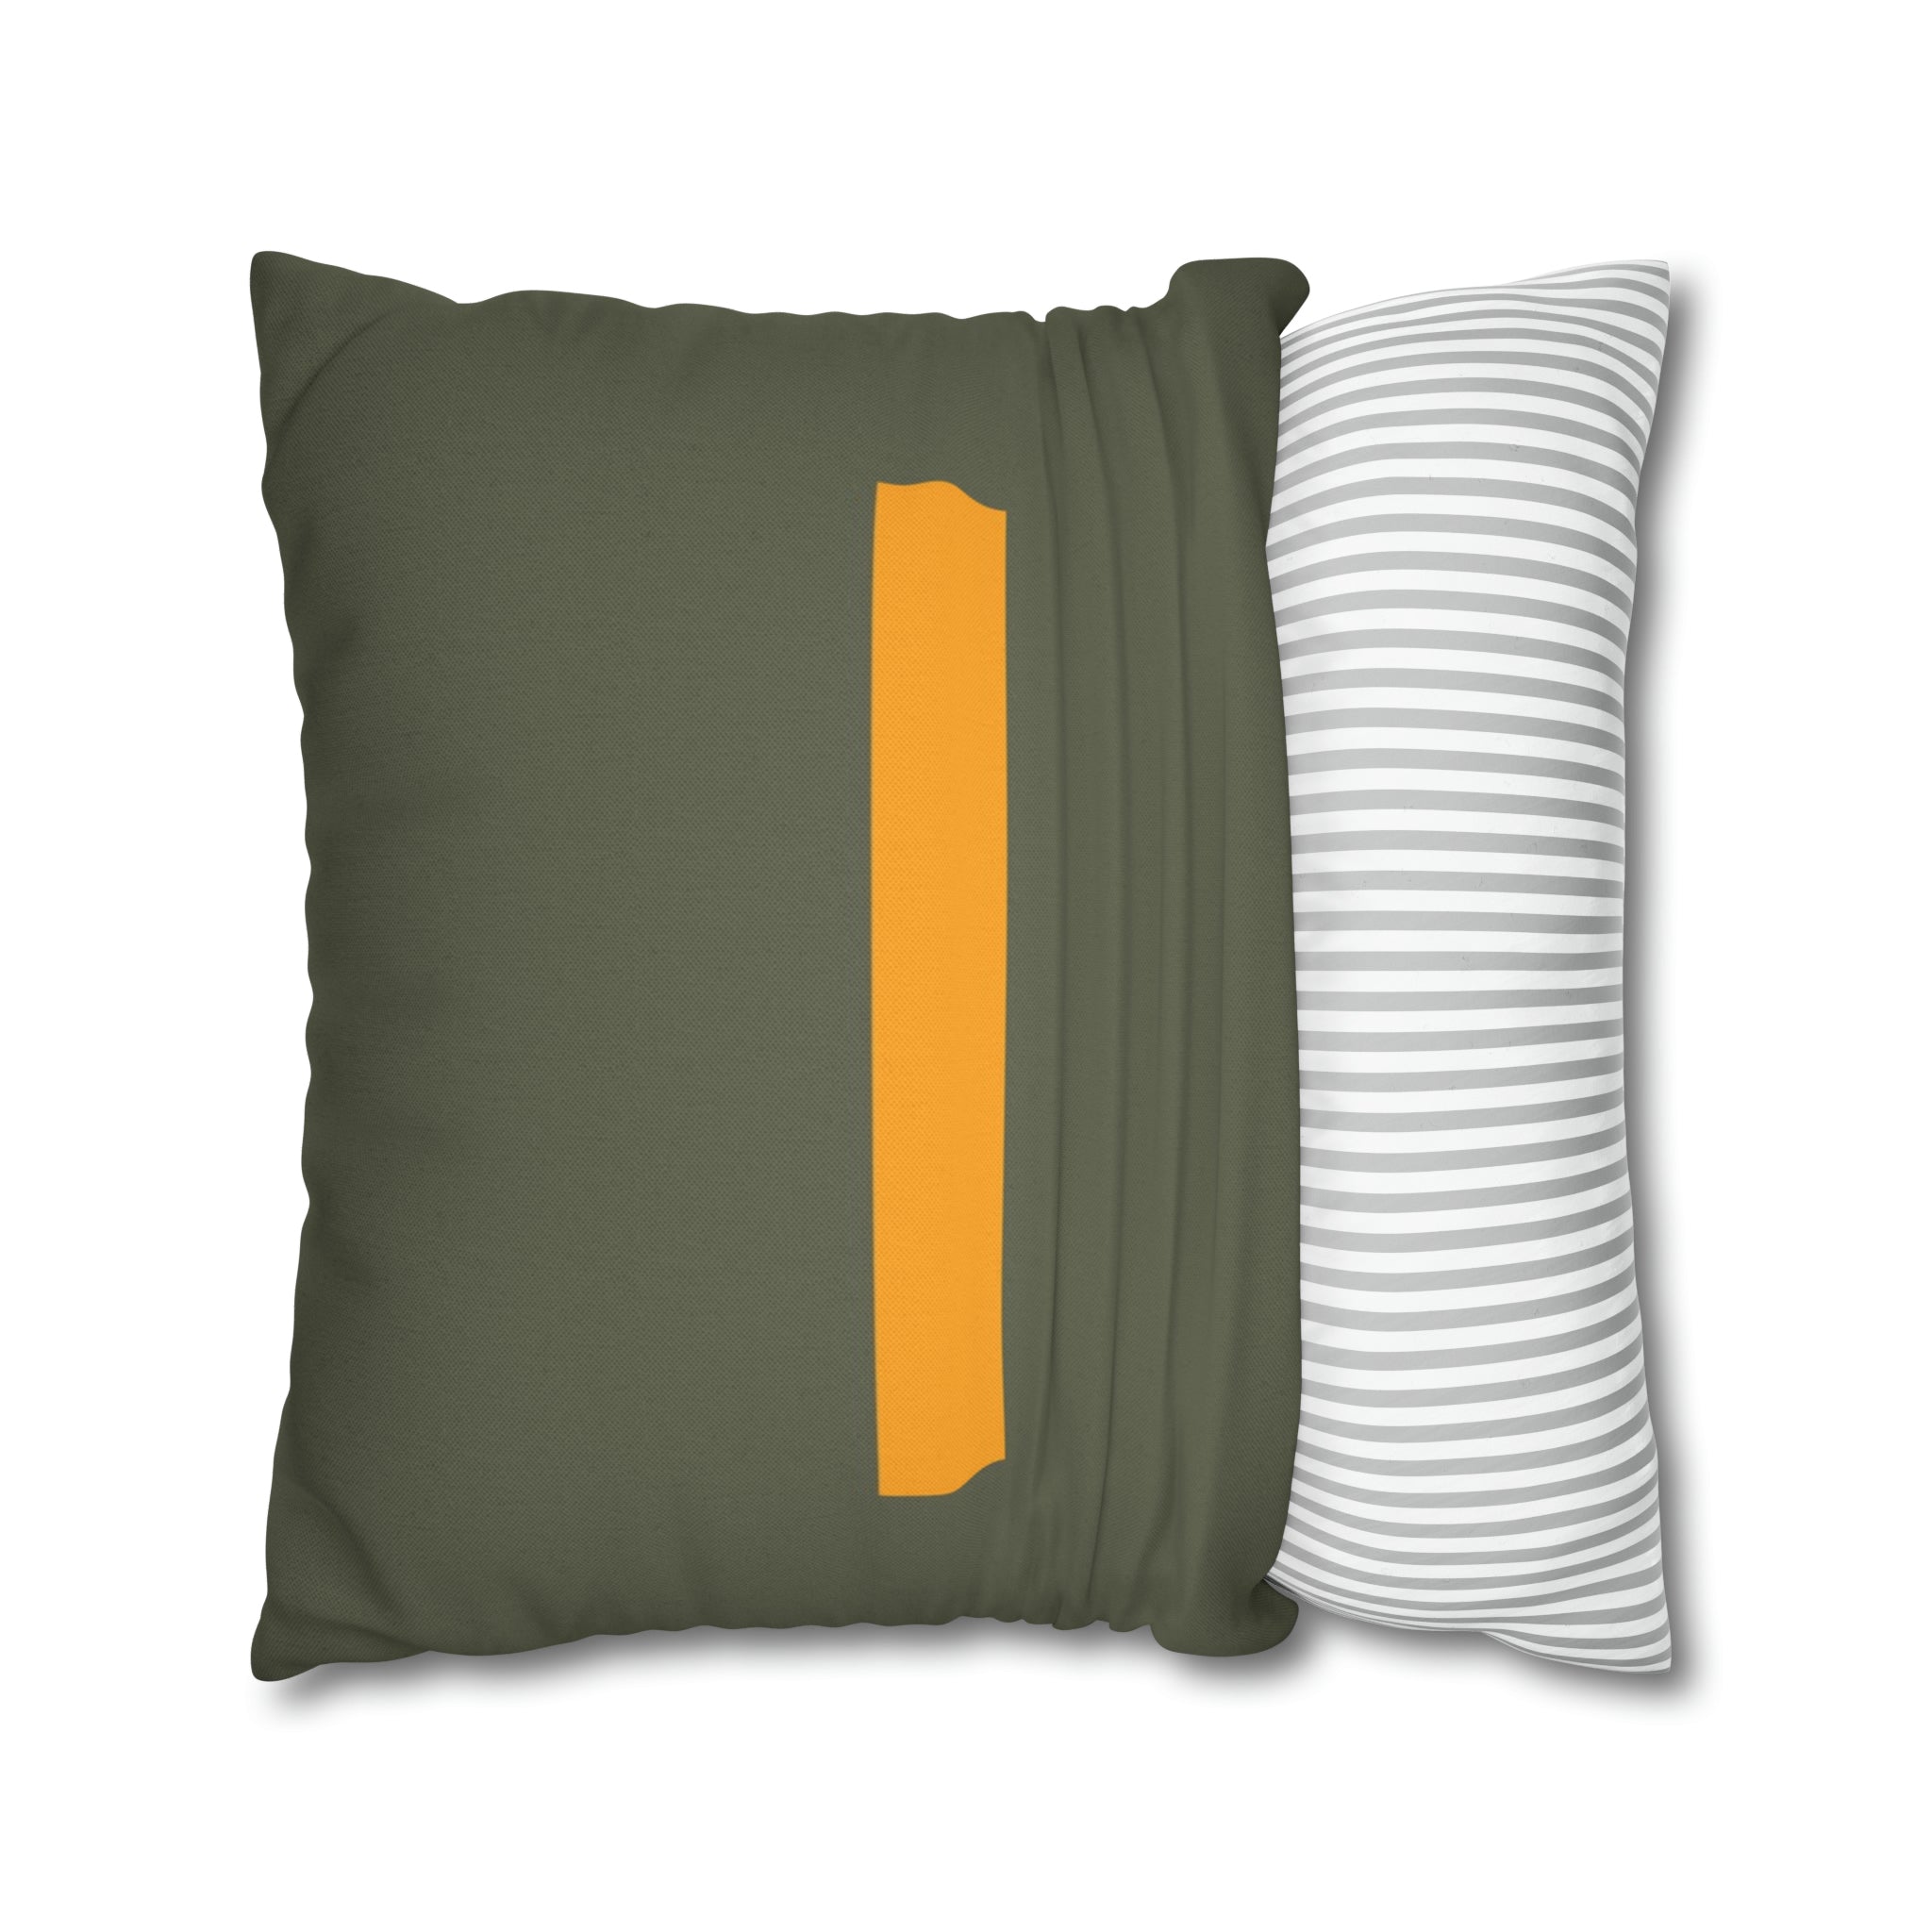 WWII USAAF Number "1" Square Pillowcase - I Love a Hangar